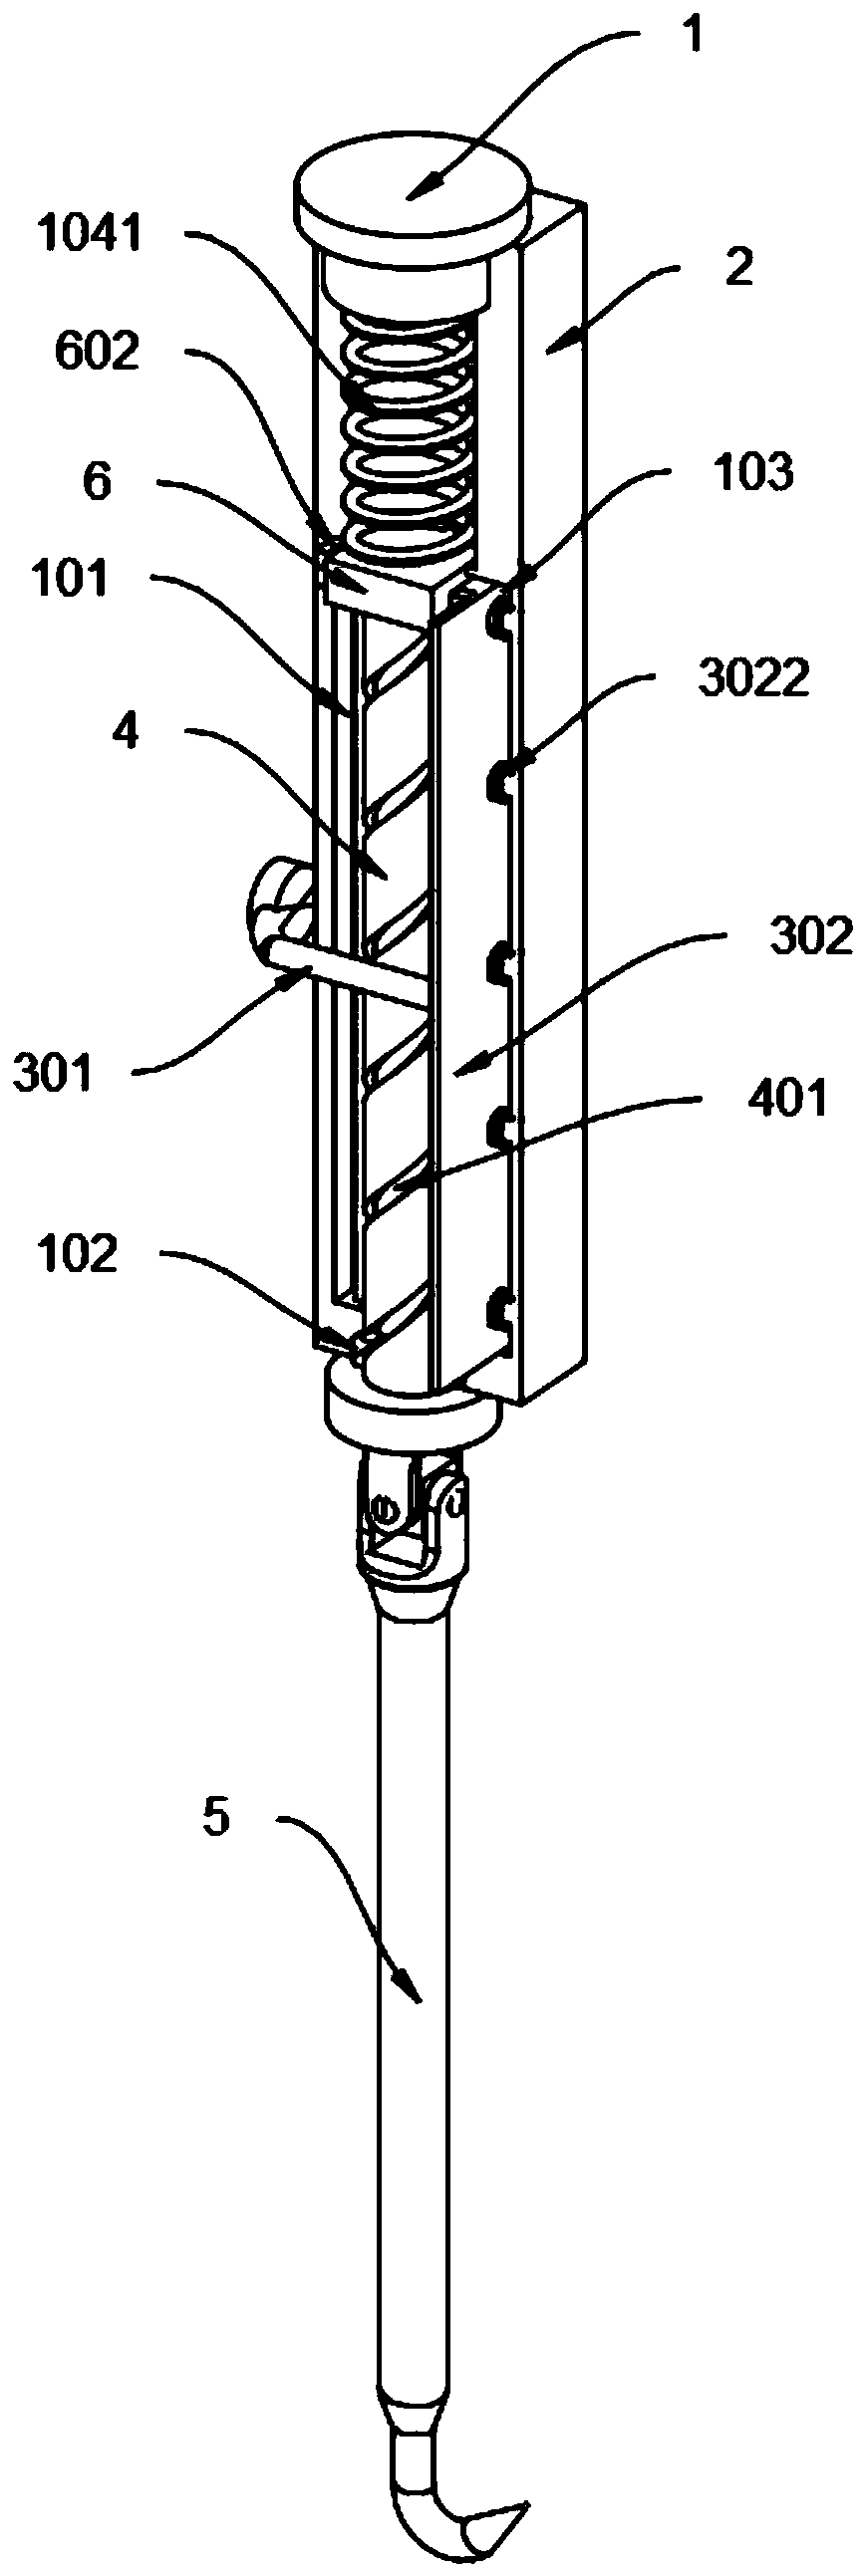 Construction device for bundling at joints of construction bars